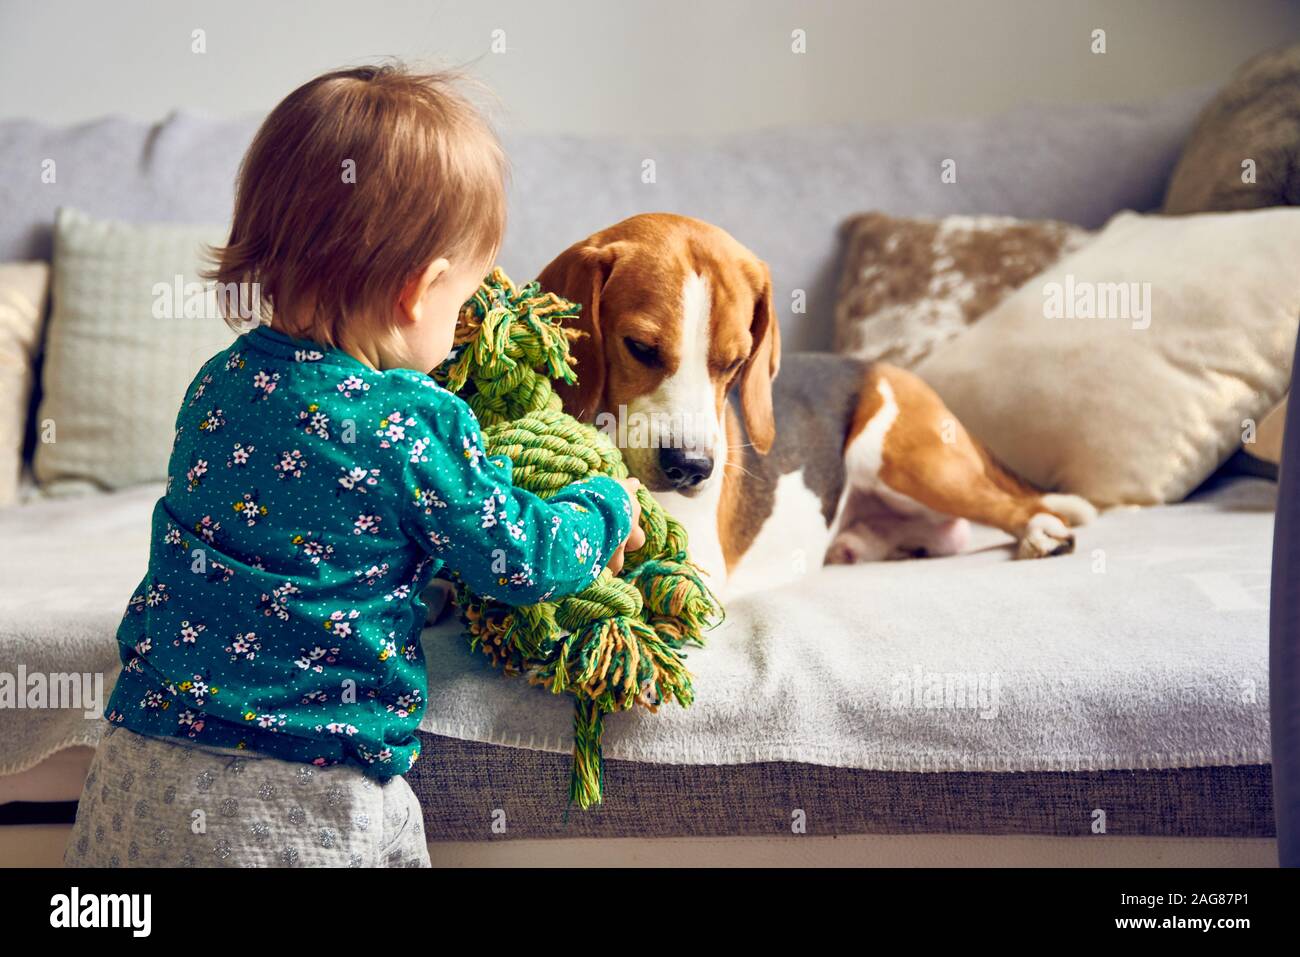 Dog with a cute caucasian baby girl. Beagle lie on sofa, baby comes with toy to play with him. Stock Photo